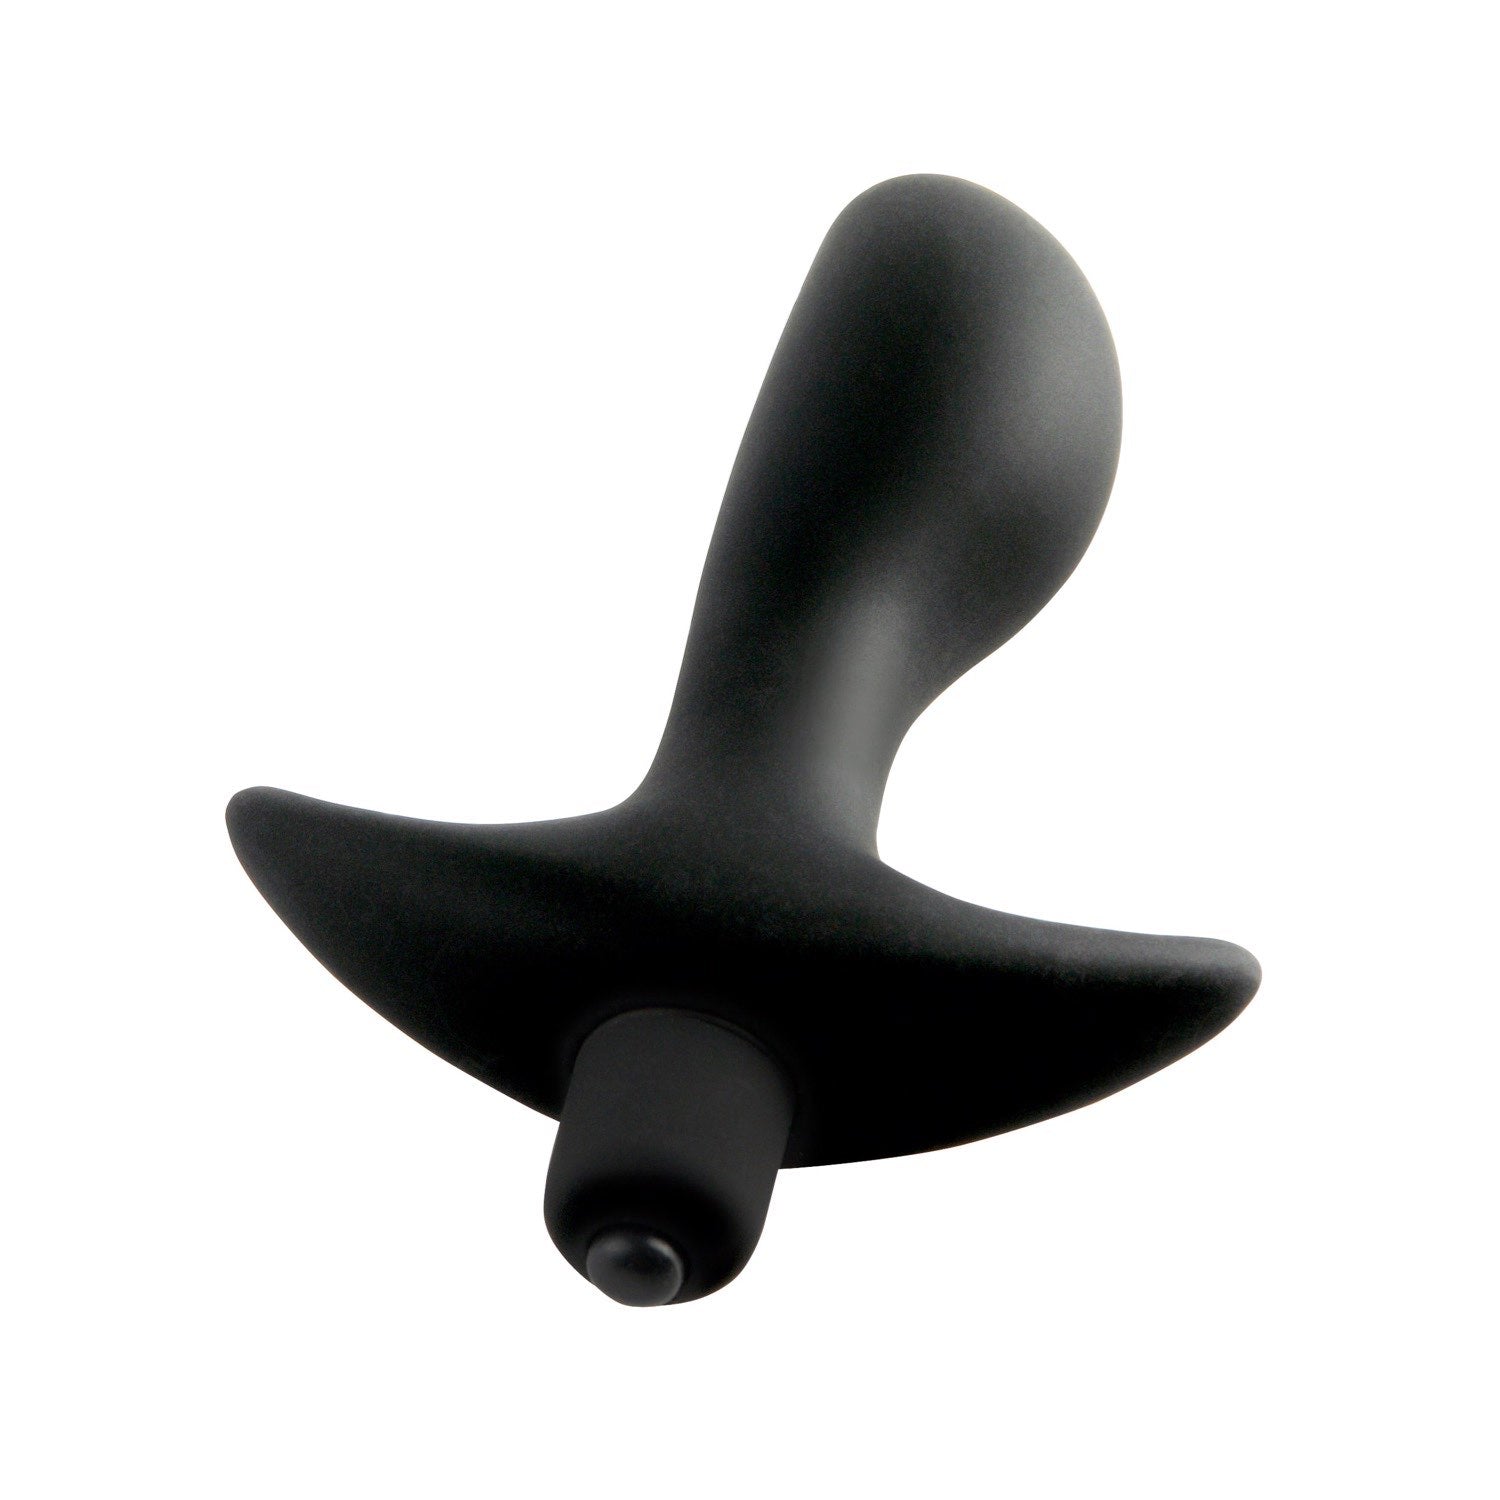 Anal Fantasy Collection Vibrating Perfect Plug - Black 9 cm (3.5&quot;) Vibrating Butt Plug by Pipedream